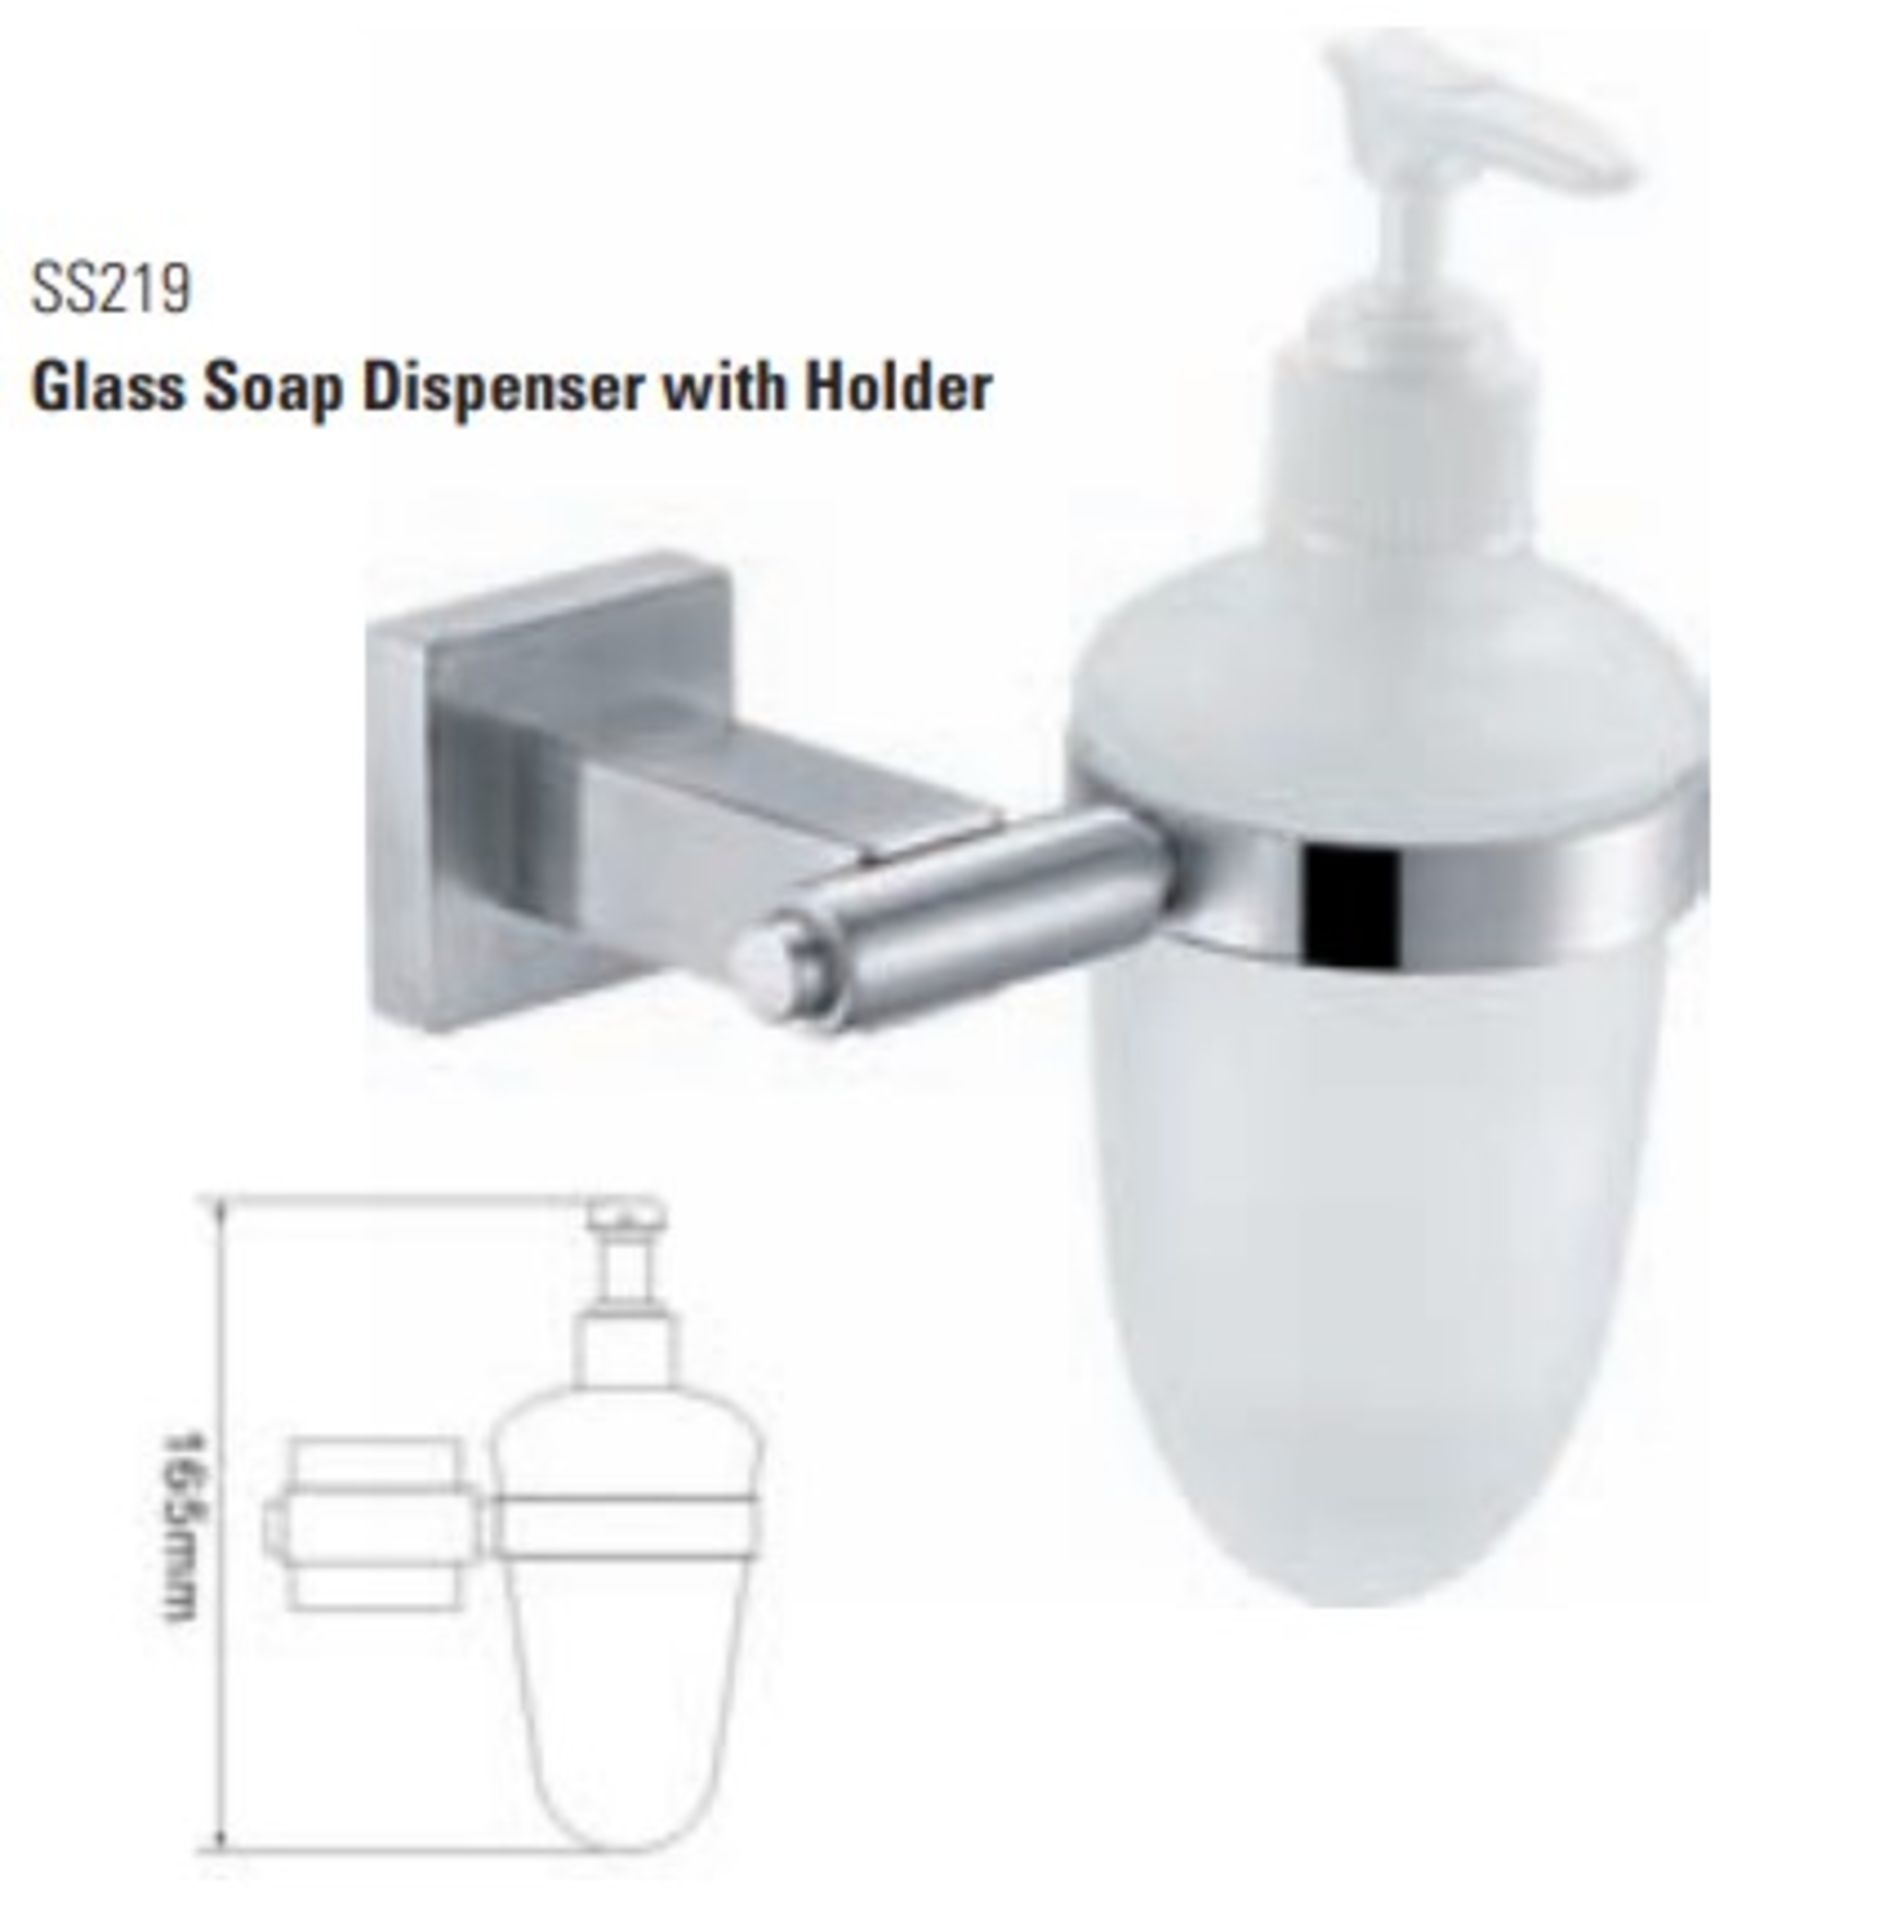 1 x Stonearth Glass Soap Dispenser With Holder - Solid Stainless Steel Bathroom Accessory - Brand - Image 3 of 3